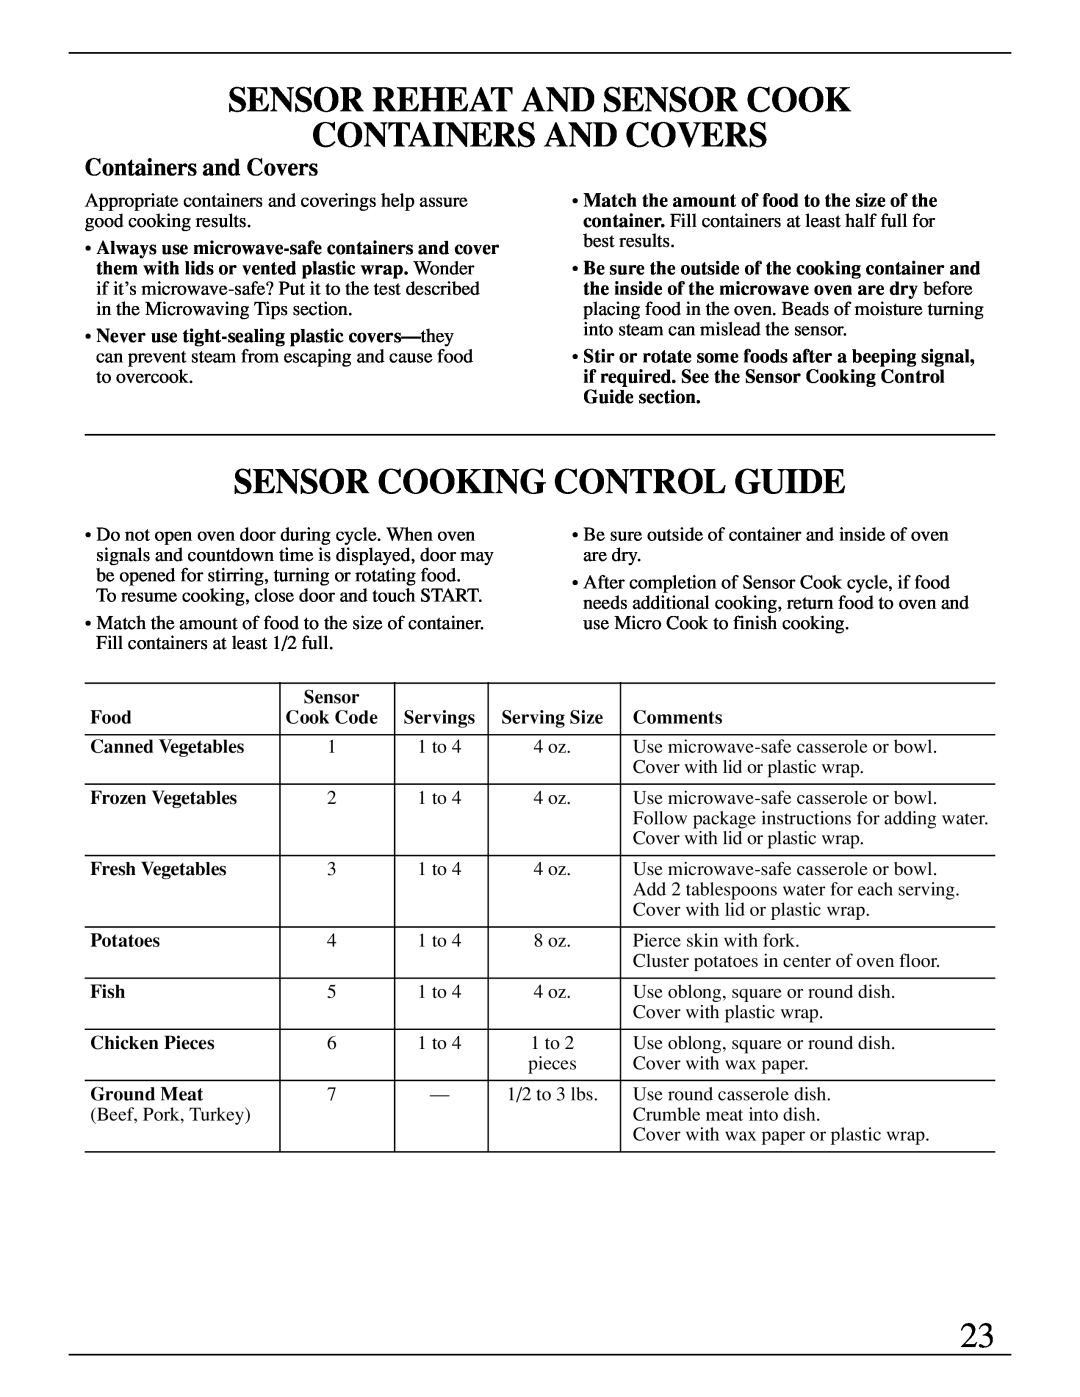 GE Monogram ZMC1095 owner manual Sensor Reheat And Sensor Cook Containers And Covers, Sensor Cooking Control Guide 